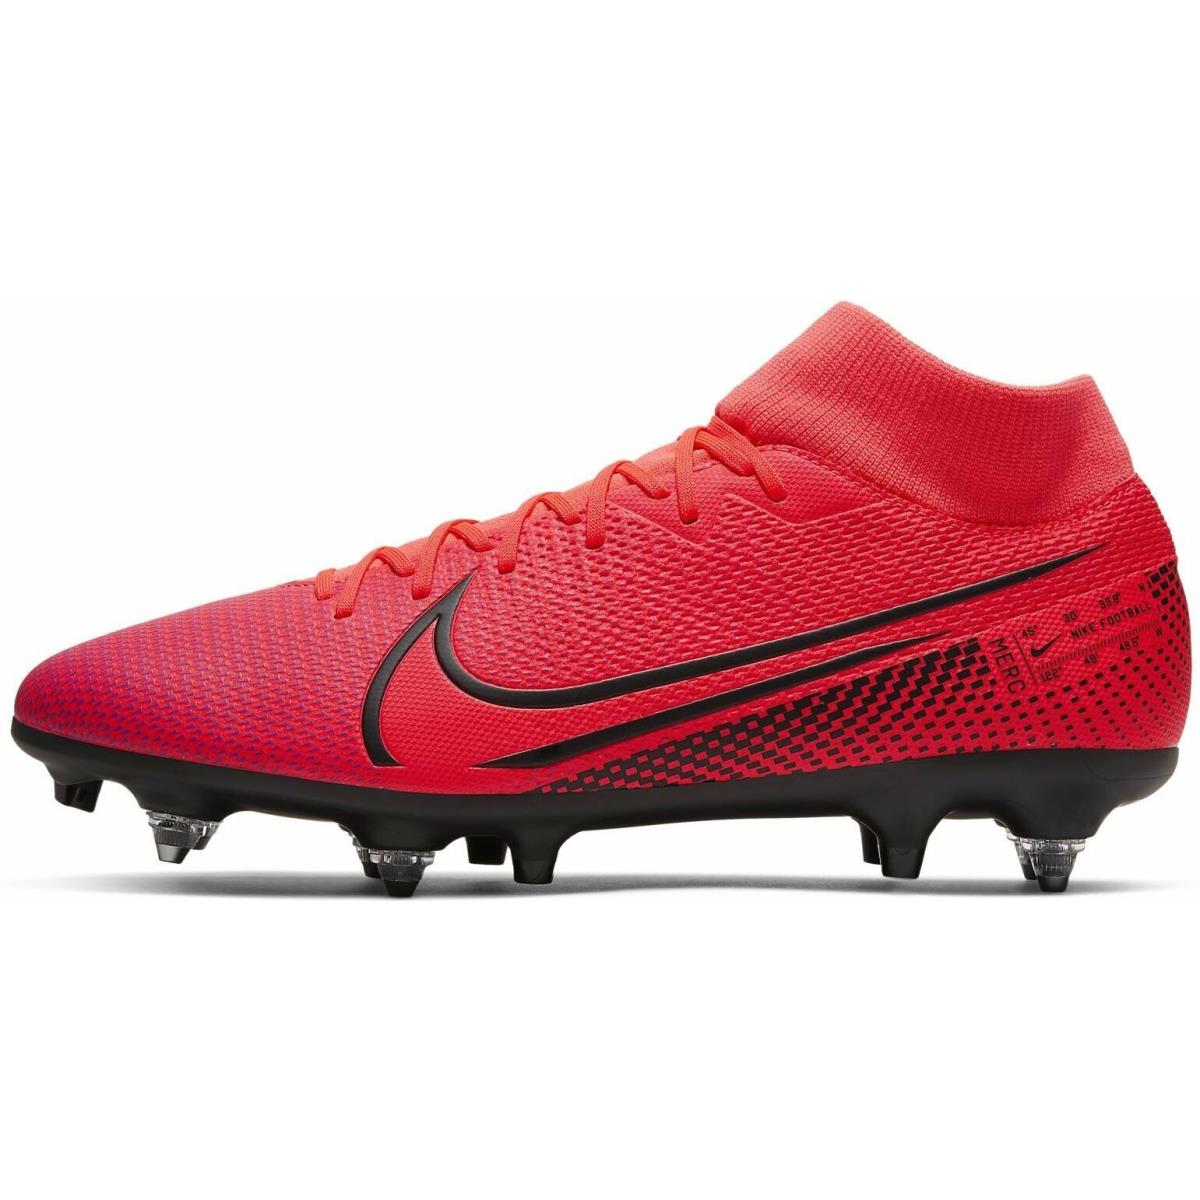 Nike Superfly 7 Academy Sg-pro Ac M BQ9141-606 Shoes Red Pink Size 10